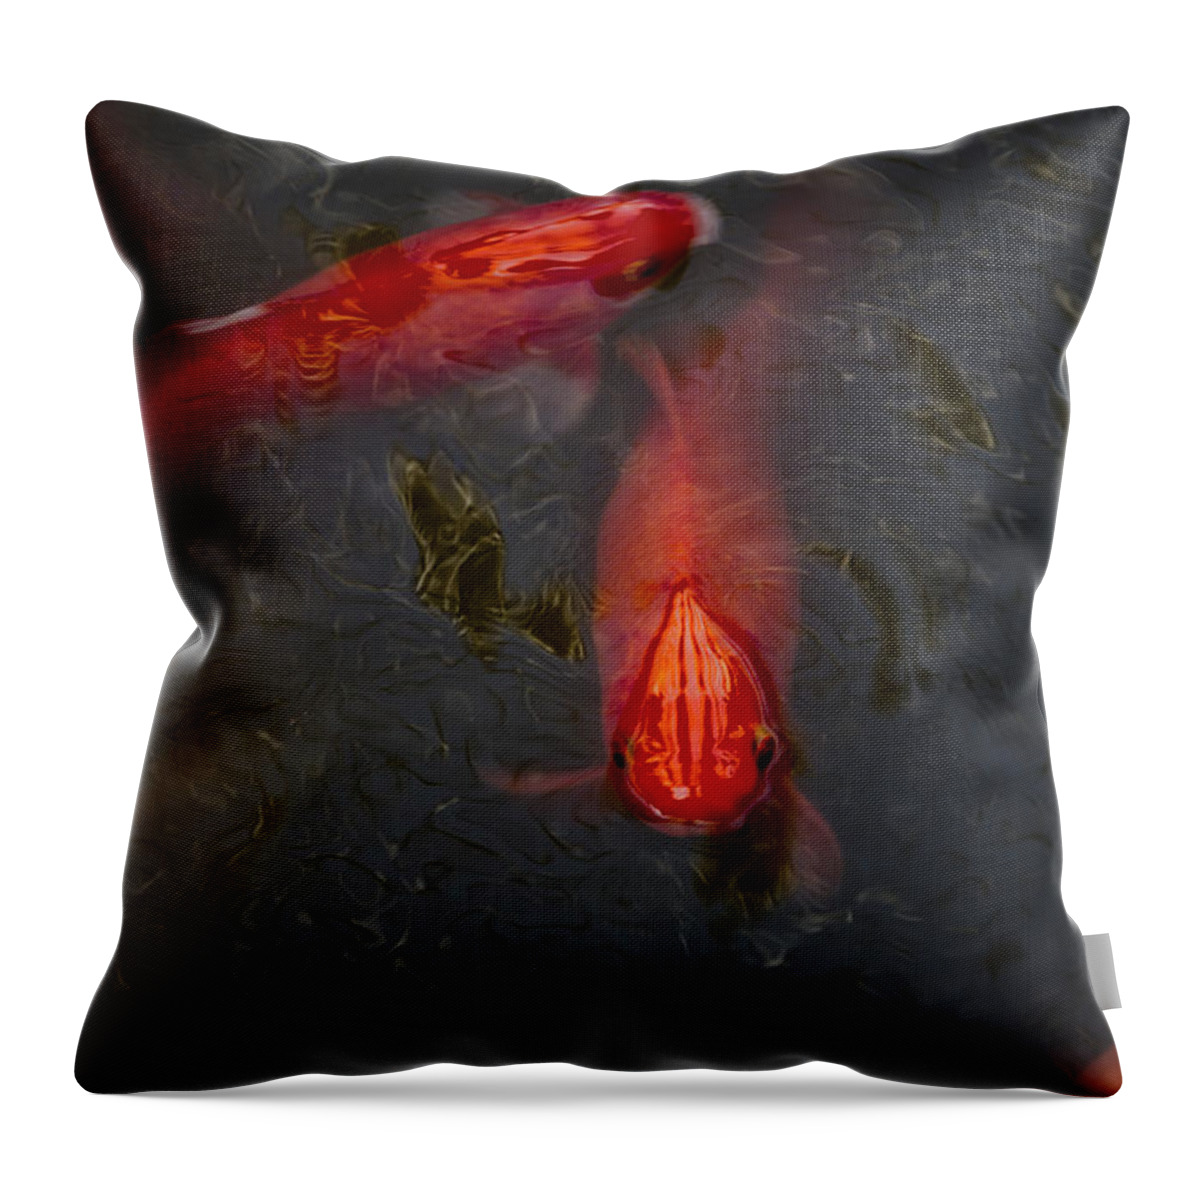 Fish Throw Pillow featuring the photograph Koi Looking by Margie Hurwich